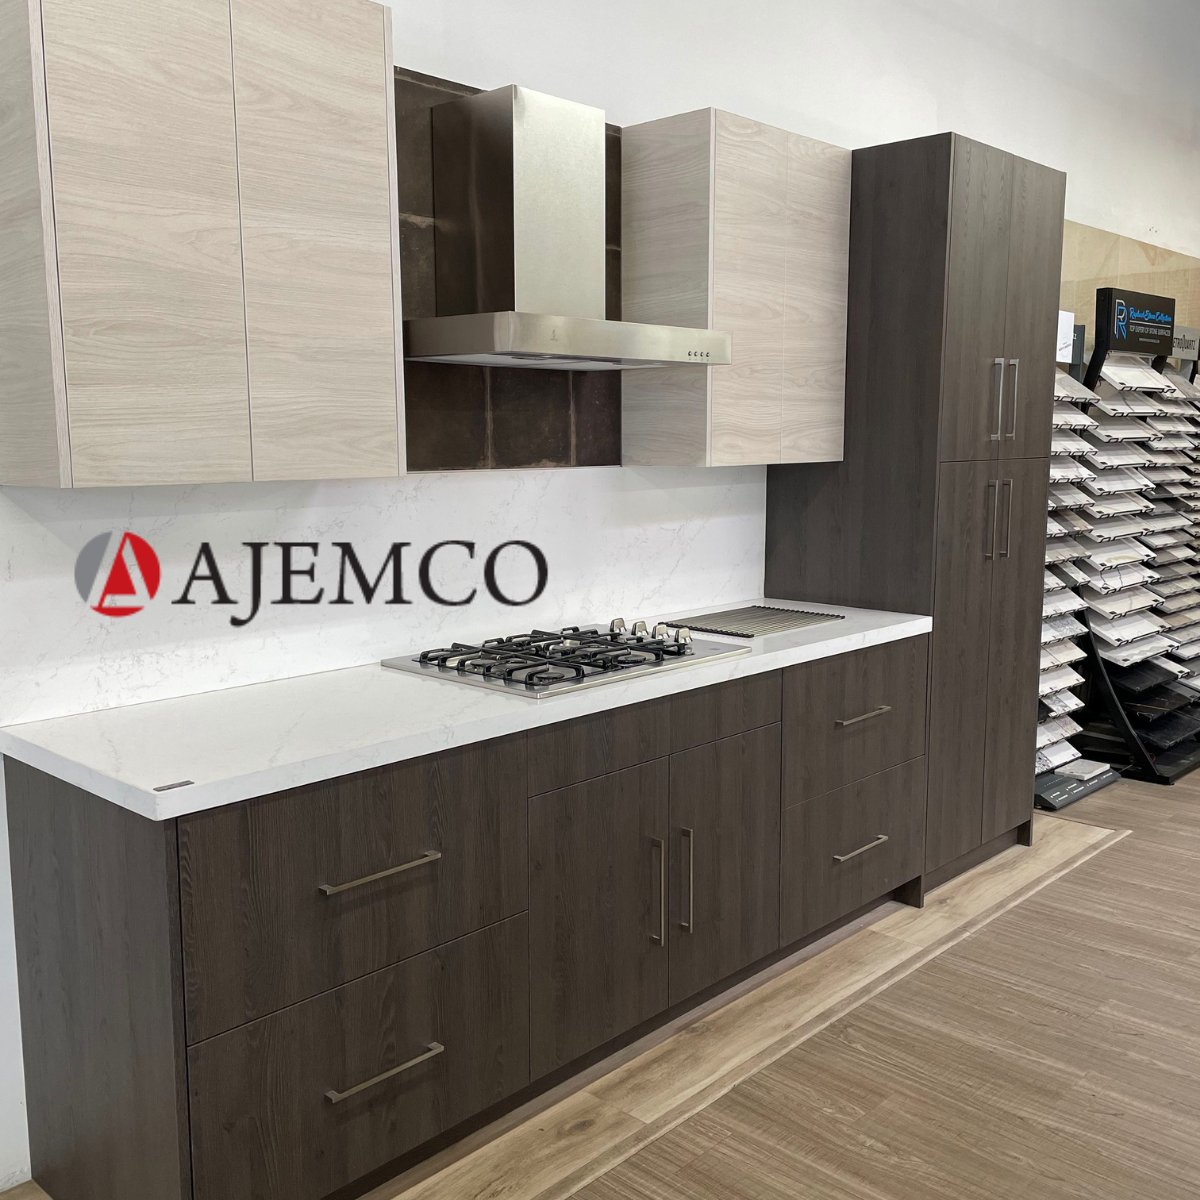 Remodel your modern kitchen to upgrade cabinets and contemporary design for an easy clean surface with more storage. To reach us - ajemco.com

#countertops #countertopdesigns #kitchendesign #kitchencountertops